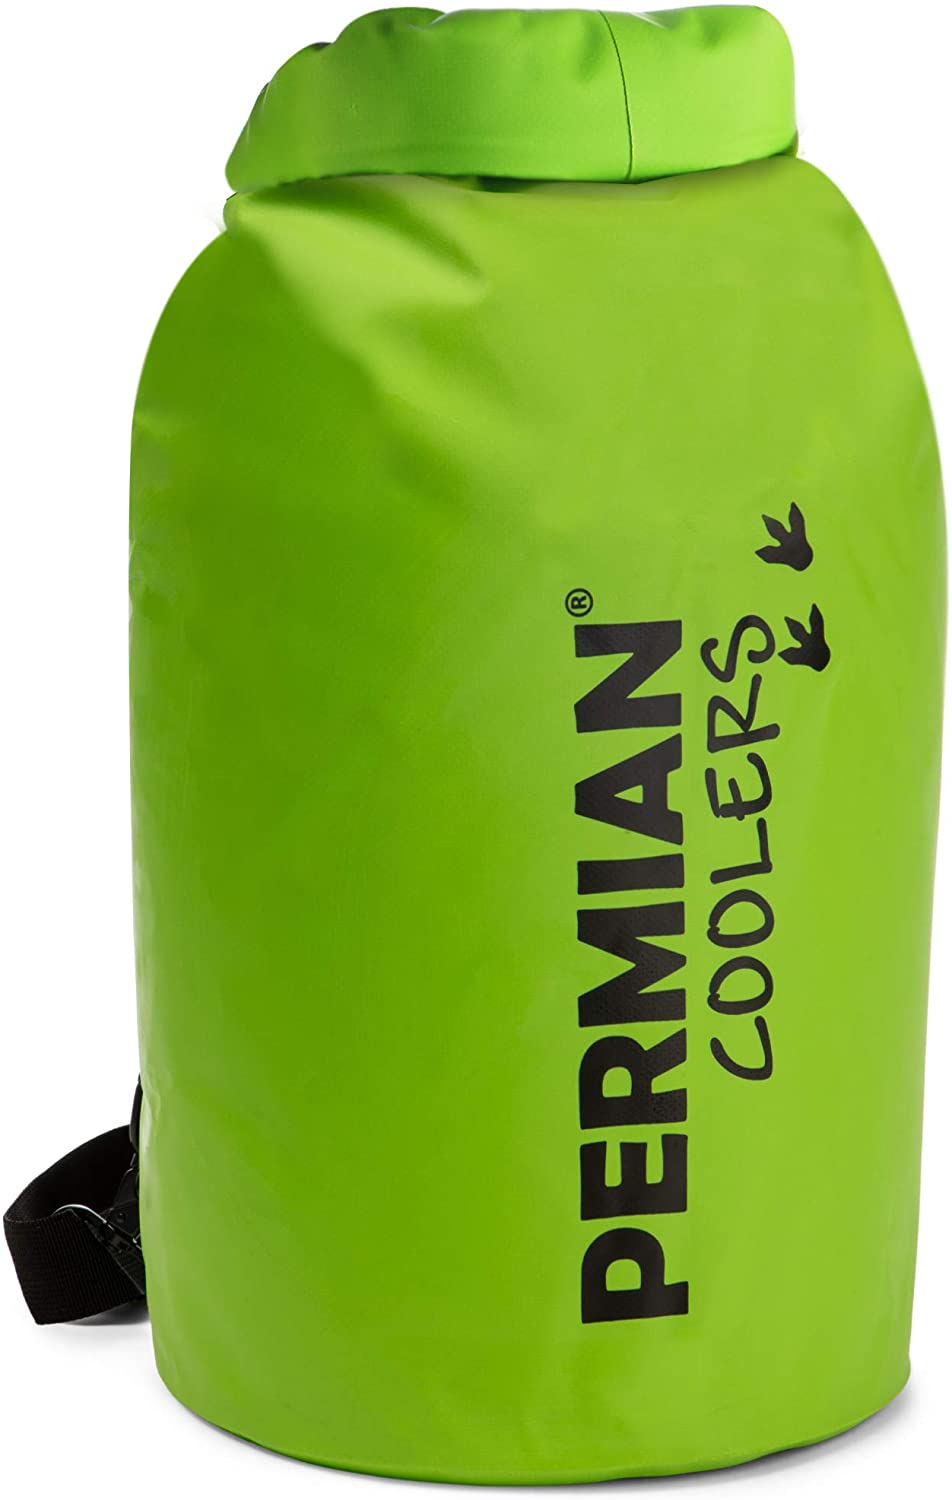 PERMIAN Coolers Portable Cooler Bag with Roll Top